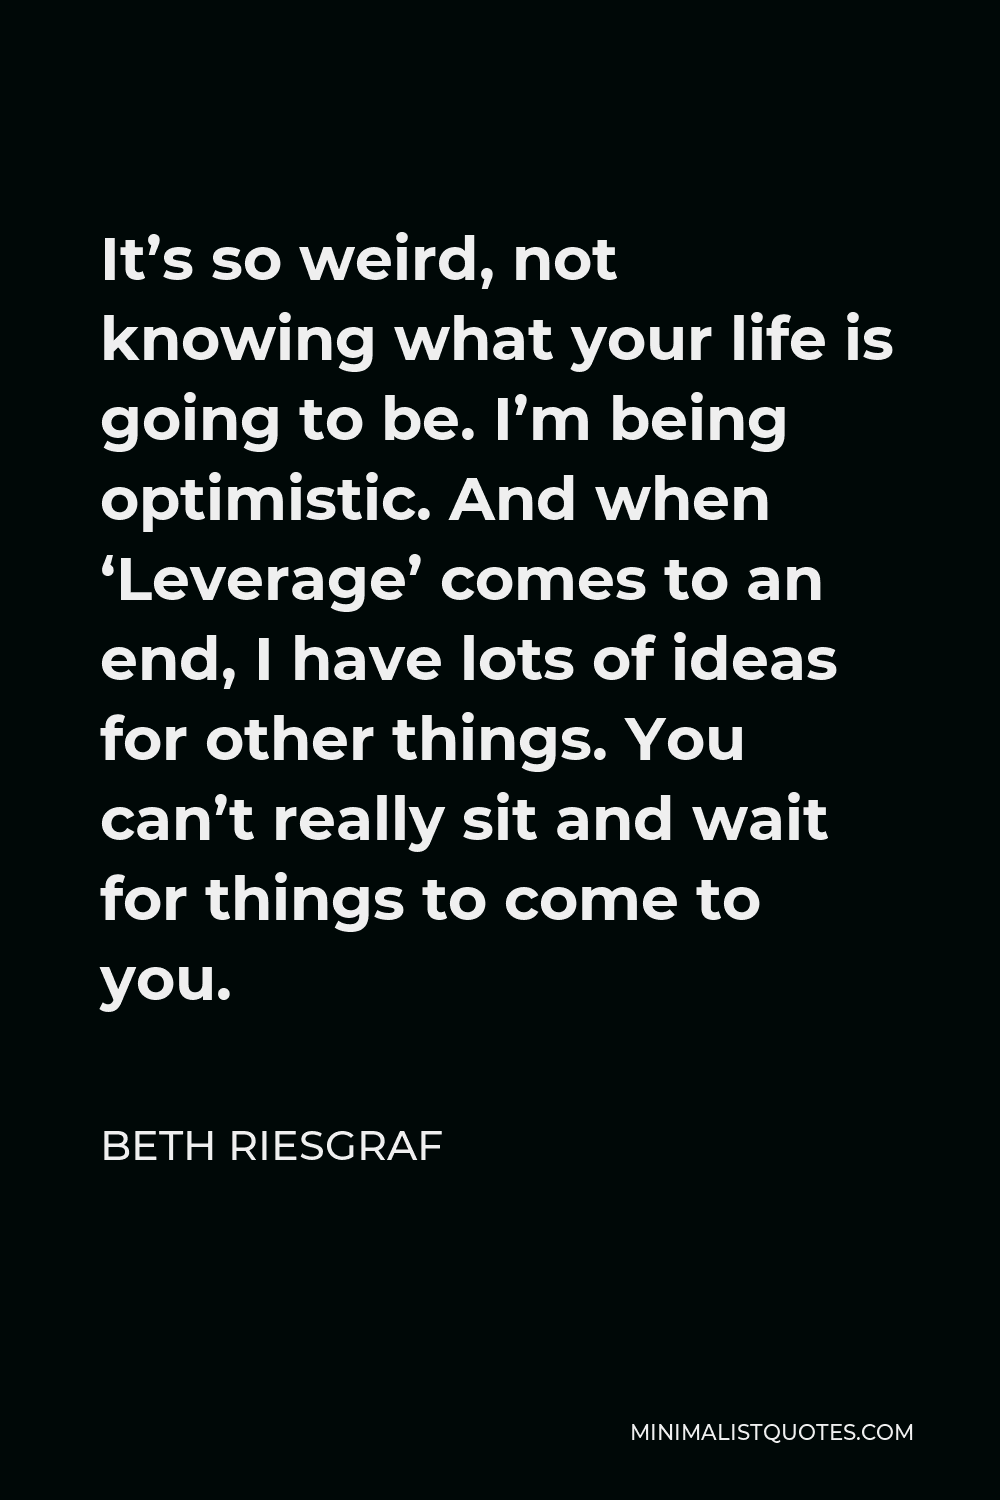 Beth Riesgraf Quote - It’s so weird, not knowing what your life is going to be. I’m being optimistic. And when ‘Leverage’ comes to an end, I have lots of ideas for other things. You can’t really sit and wait for things to come to you.